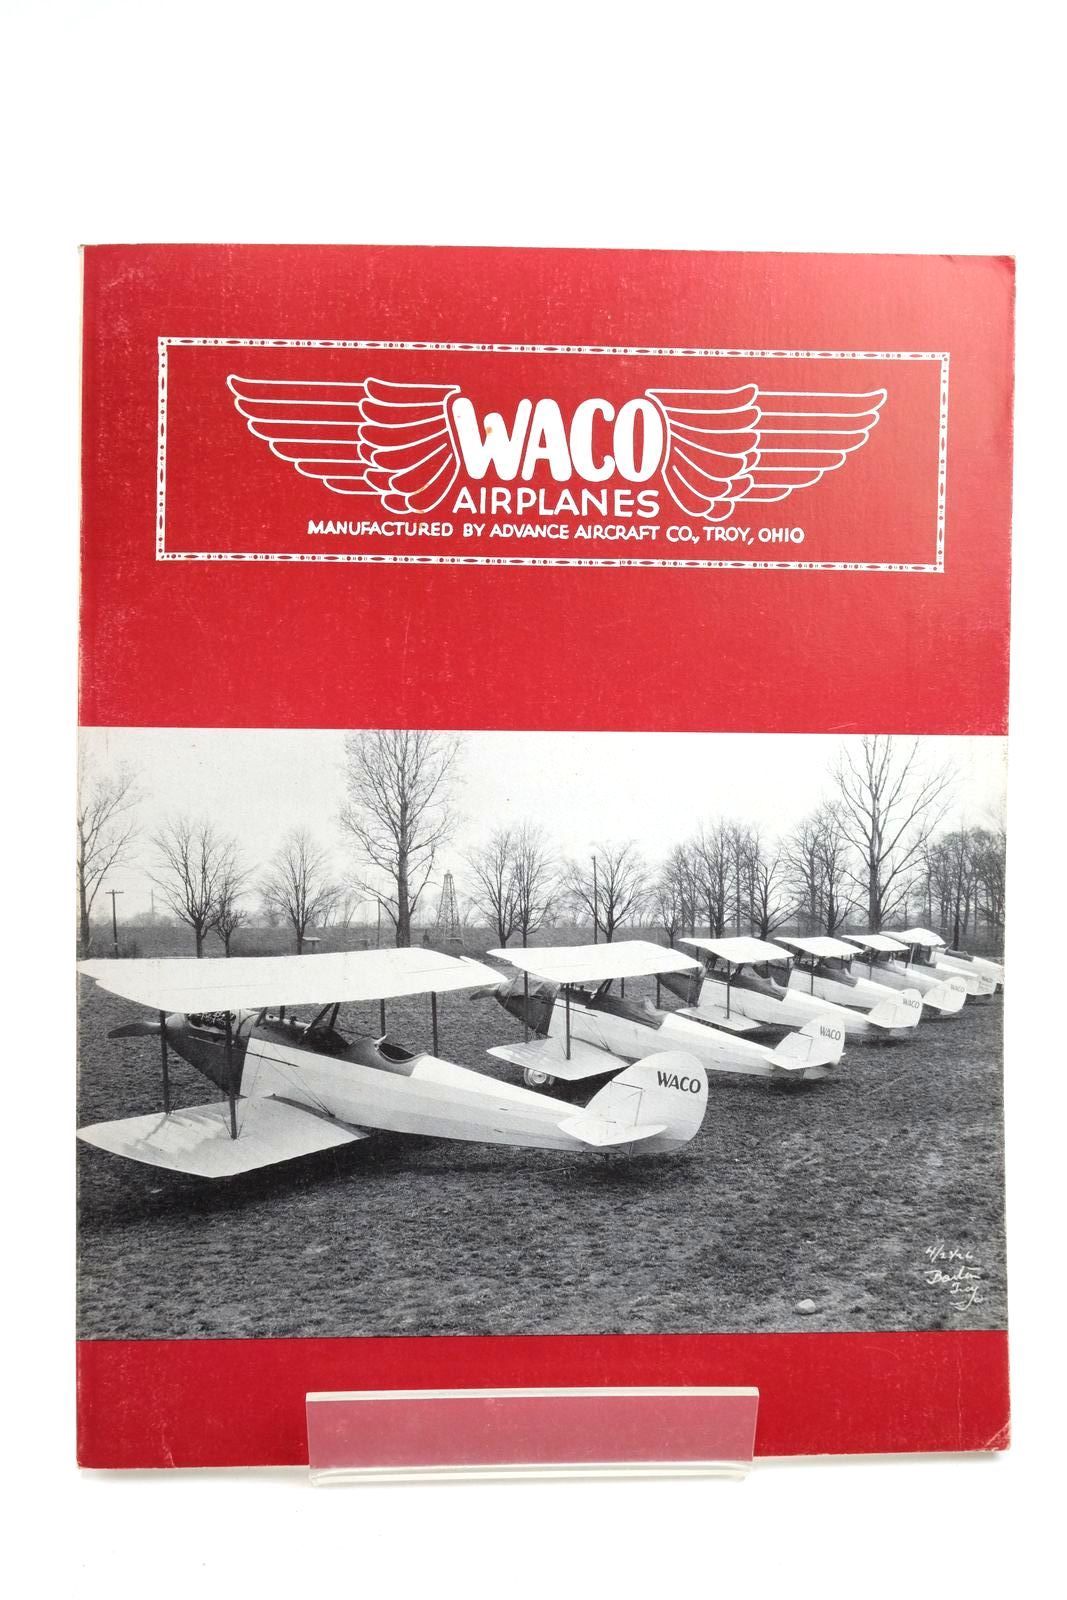 Photo of WACO AIRCRAFT PRODUCTION9 1923 -1942 written by Brandly, Raymond H. Borisch, Bonnie Jean (STOCK CODE: 2138693)  for sale by Stella & Rose's Books